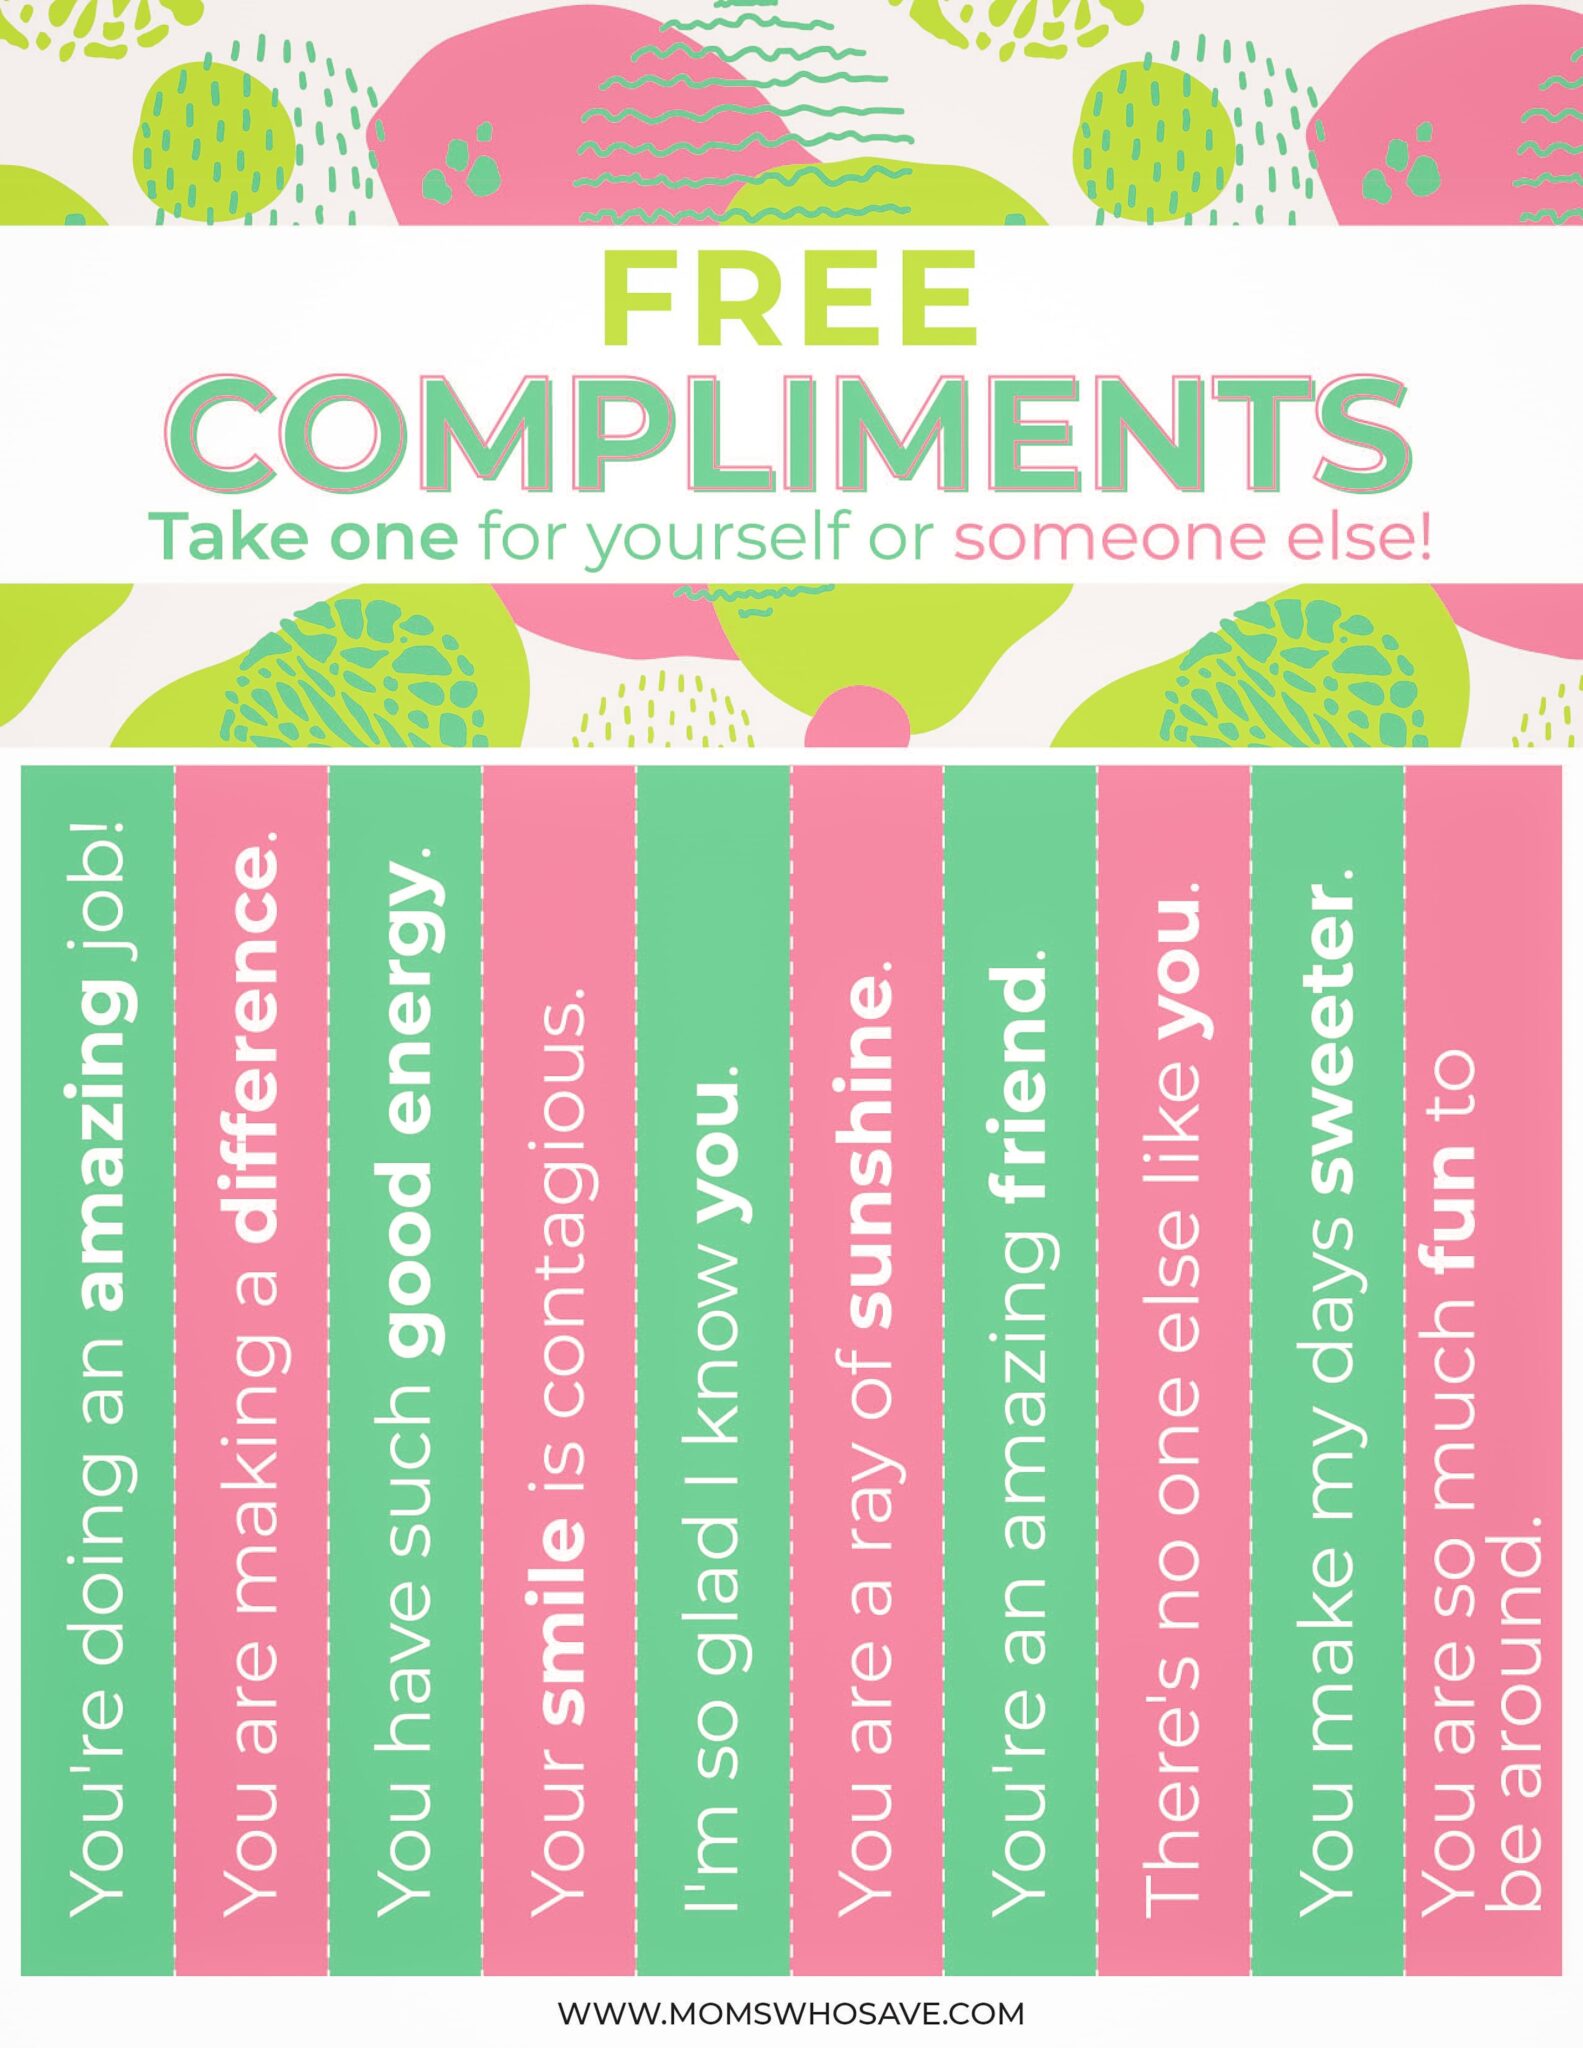 spread-a-little-joy-with-this-free-compliments-printable